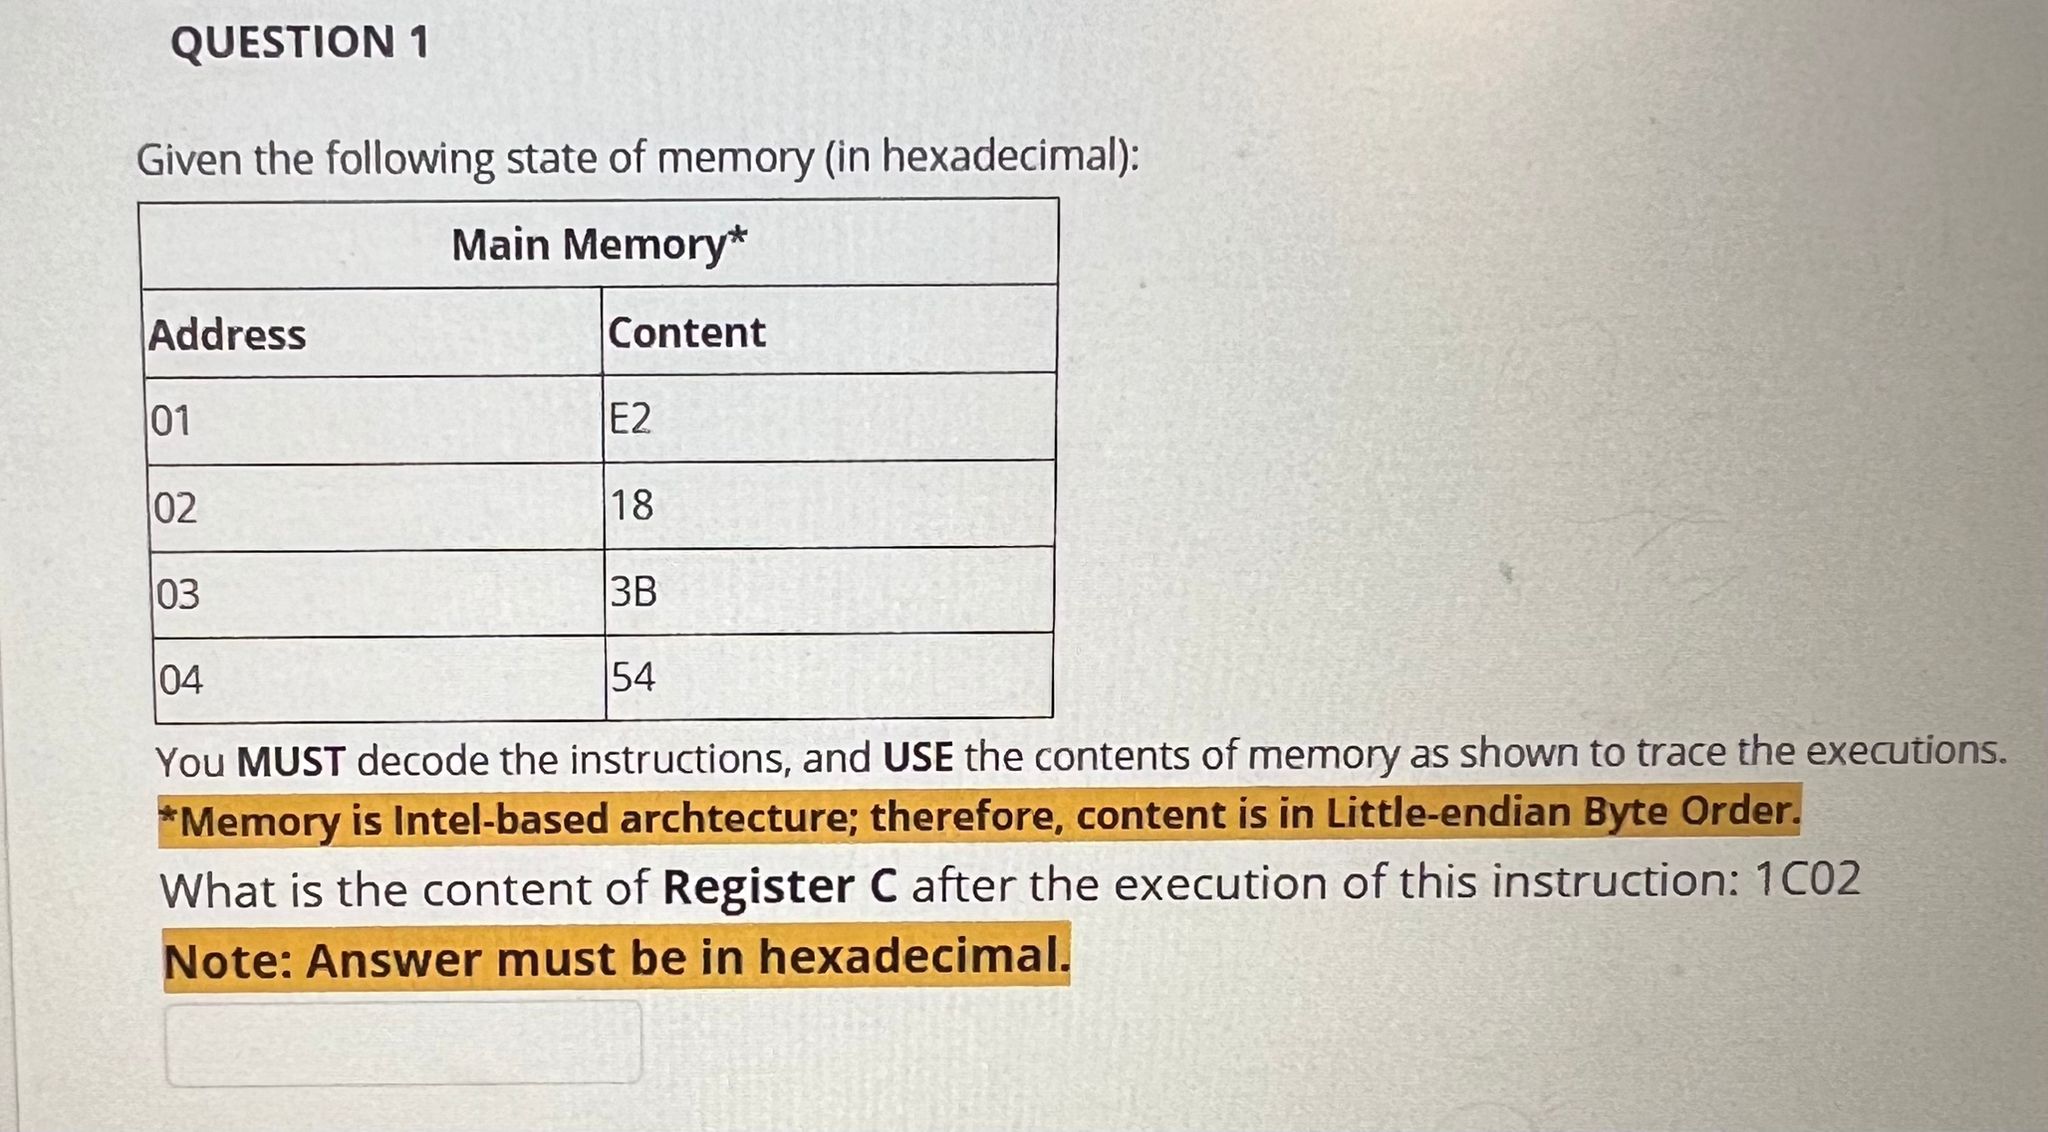 QUESTION 1 Given the following state of memory (in hexadecimal): Main Memory* Content Address 101 102 03 E2